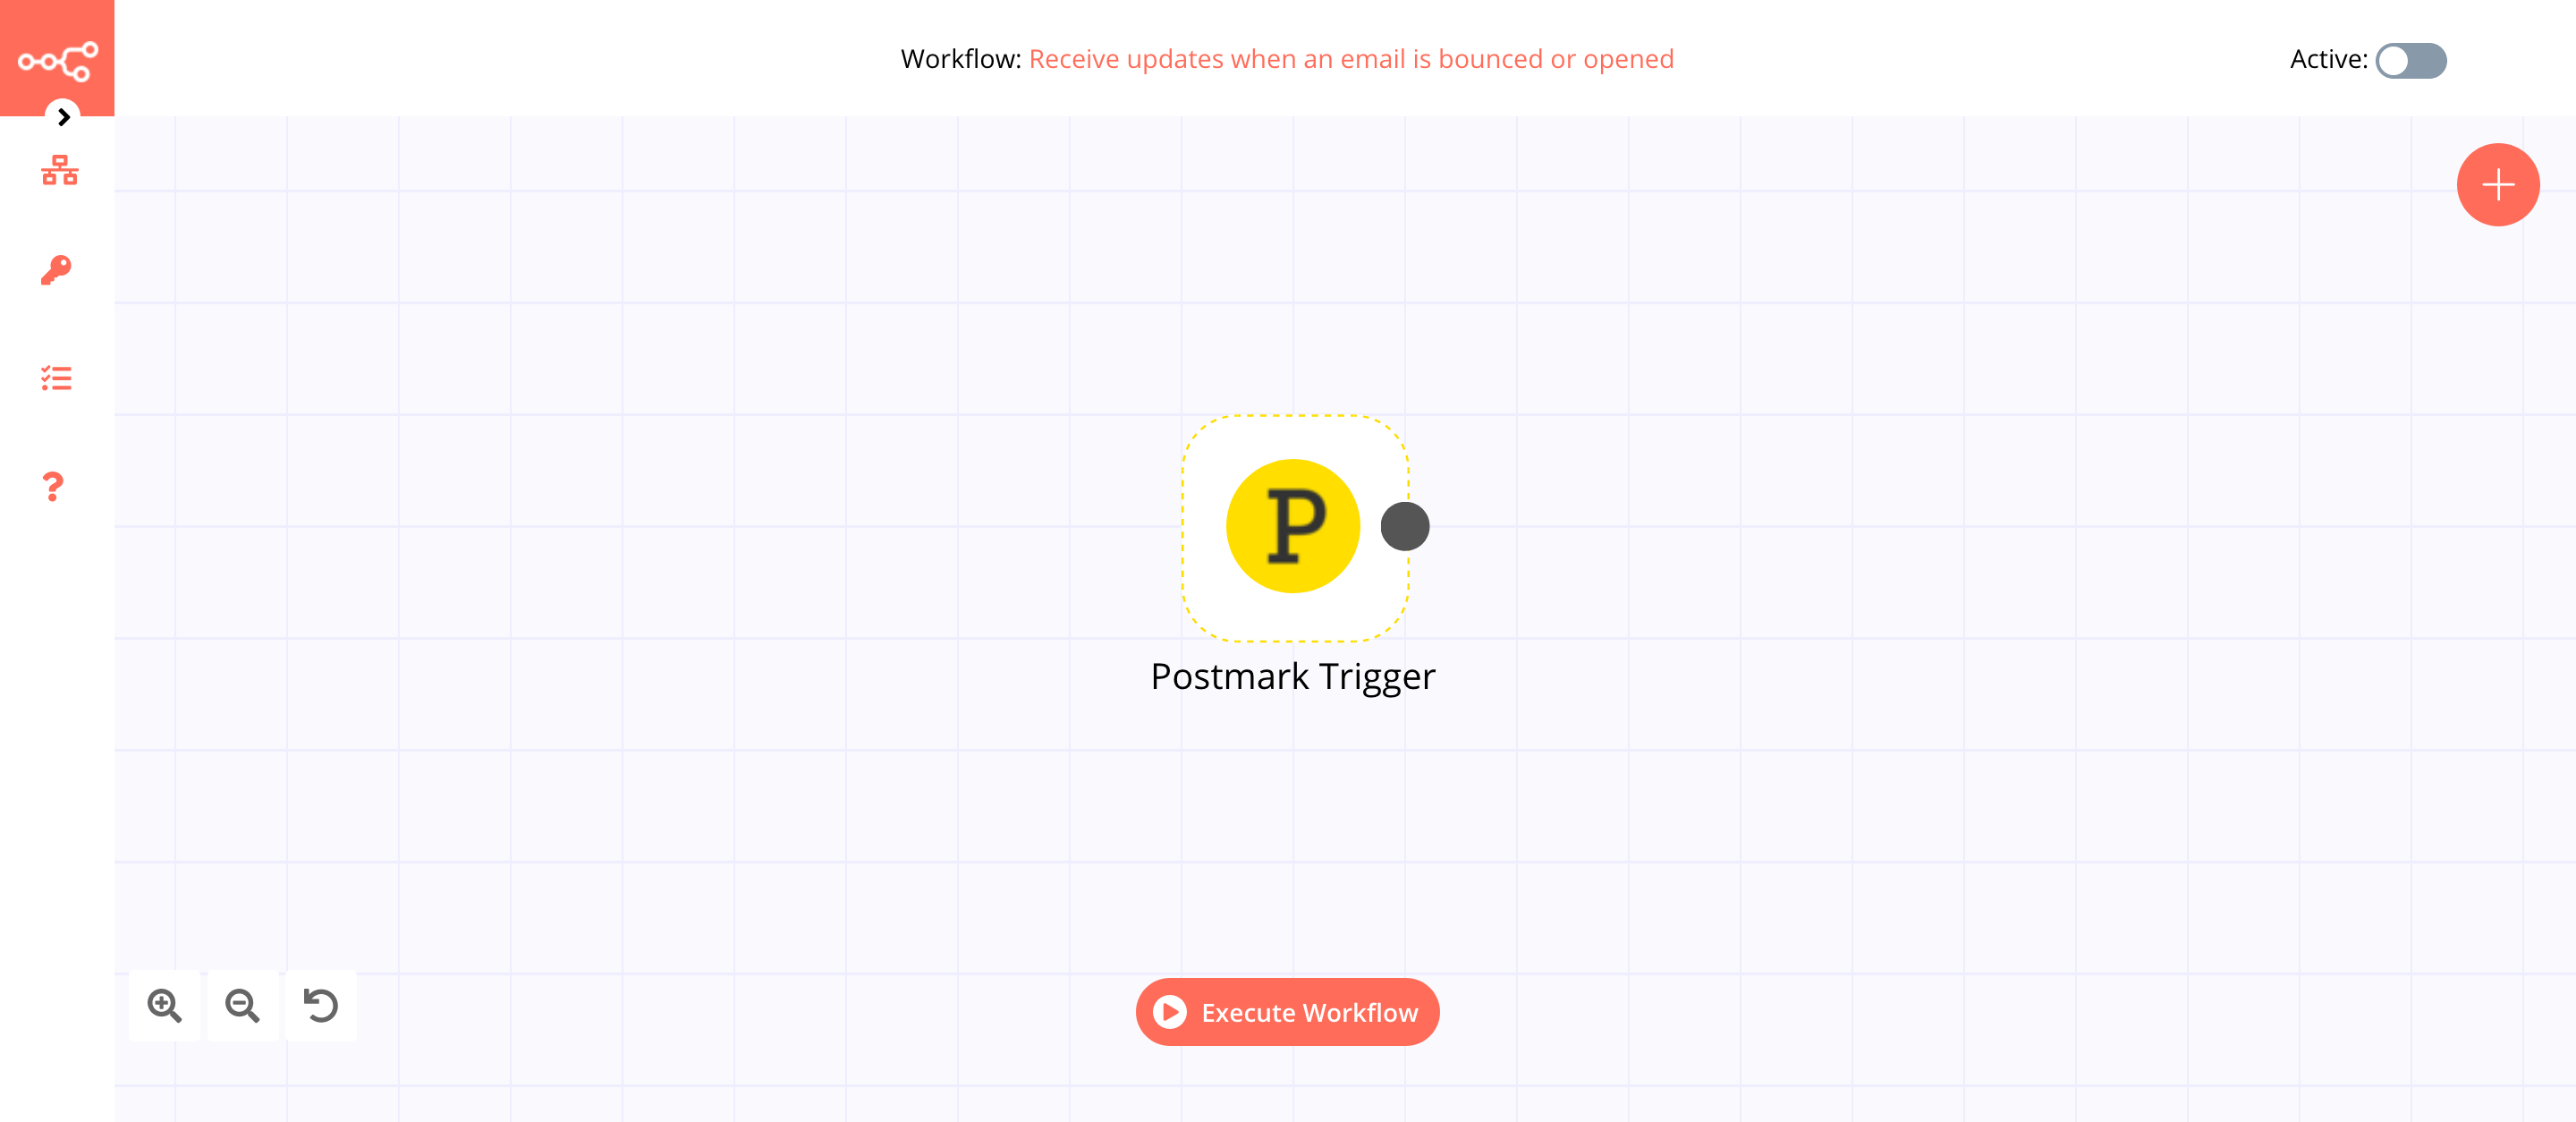 A workflow with the Postmark Trigger node